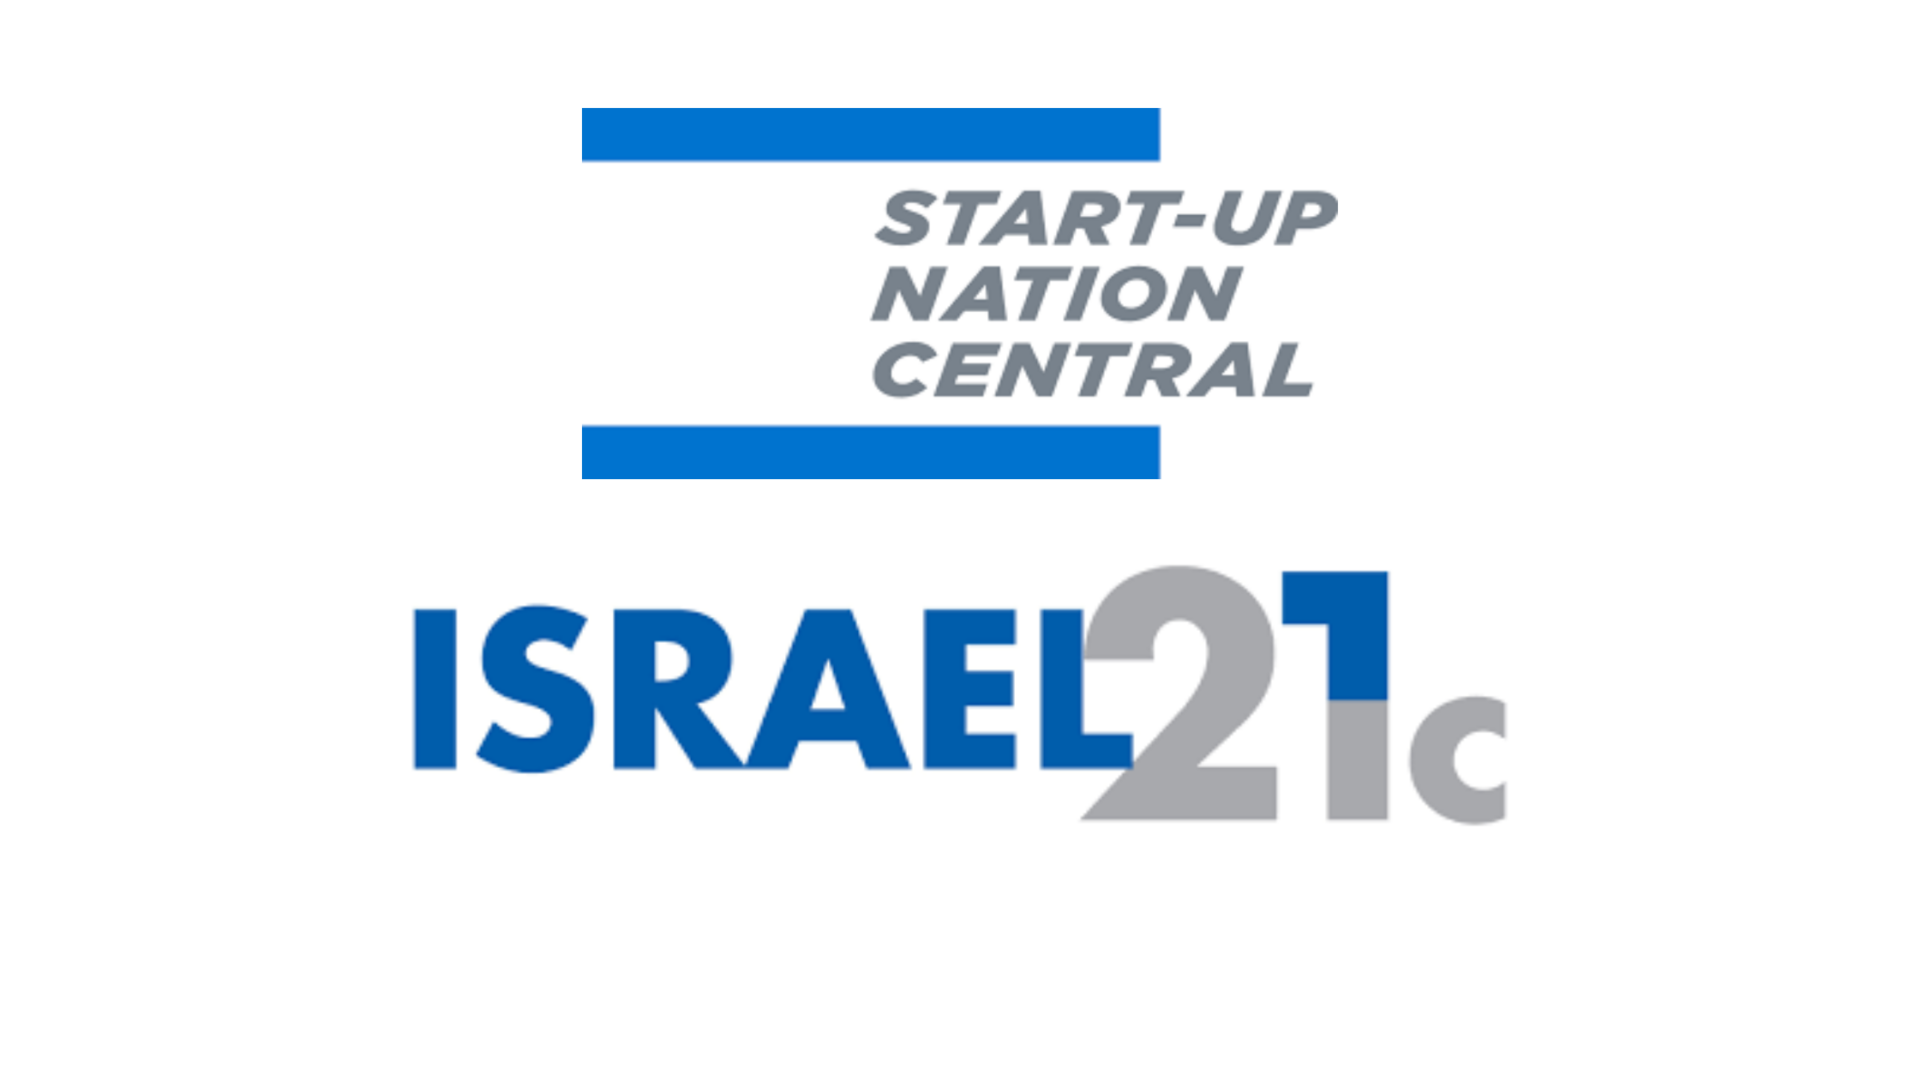 PetPace on Israel 21c and Startup Nation Central